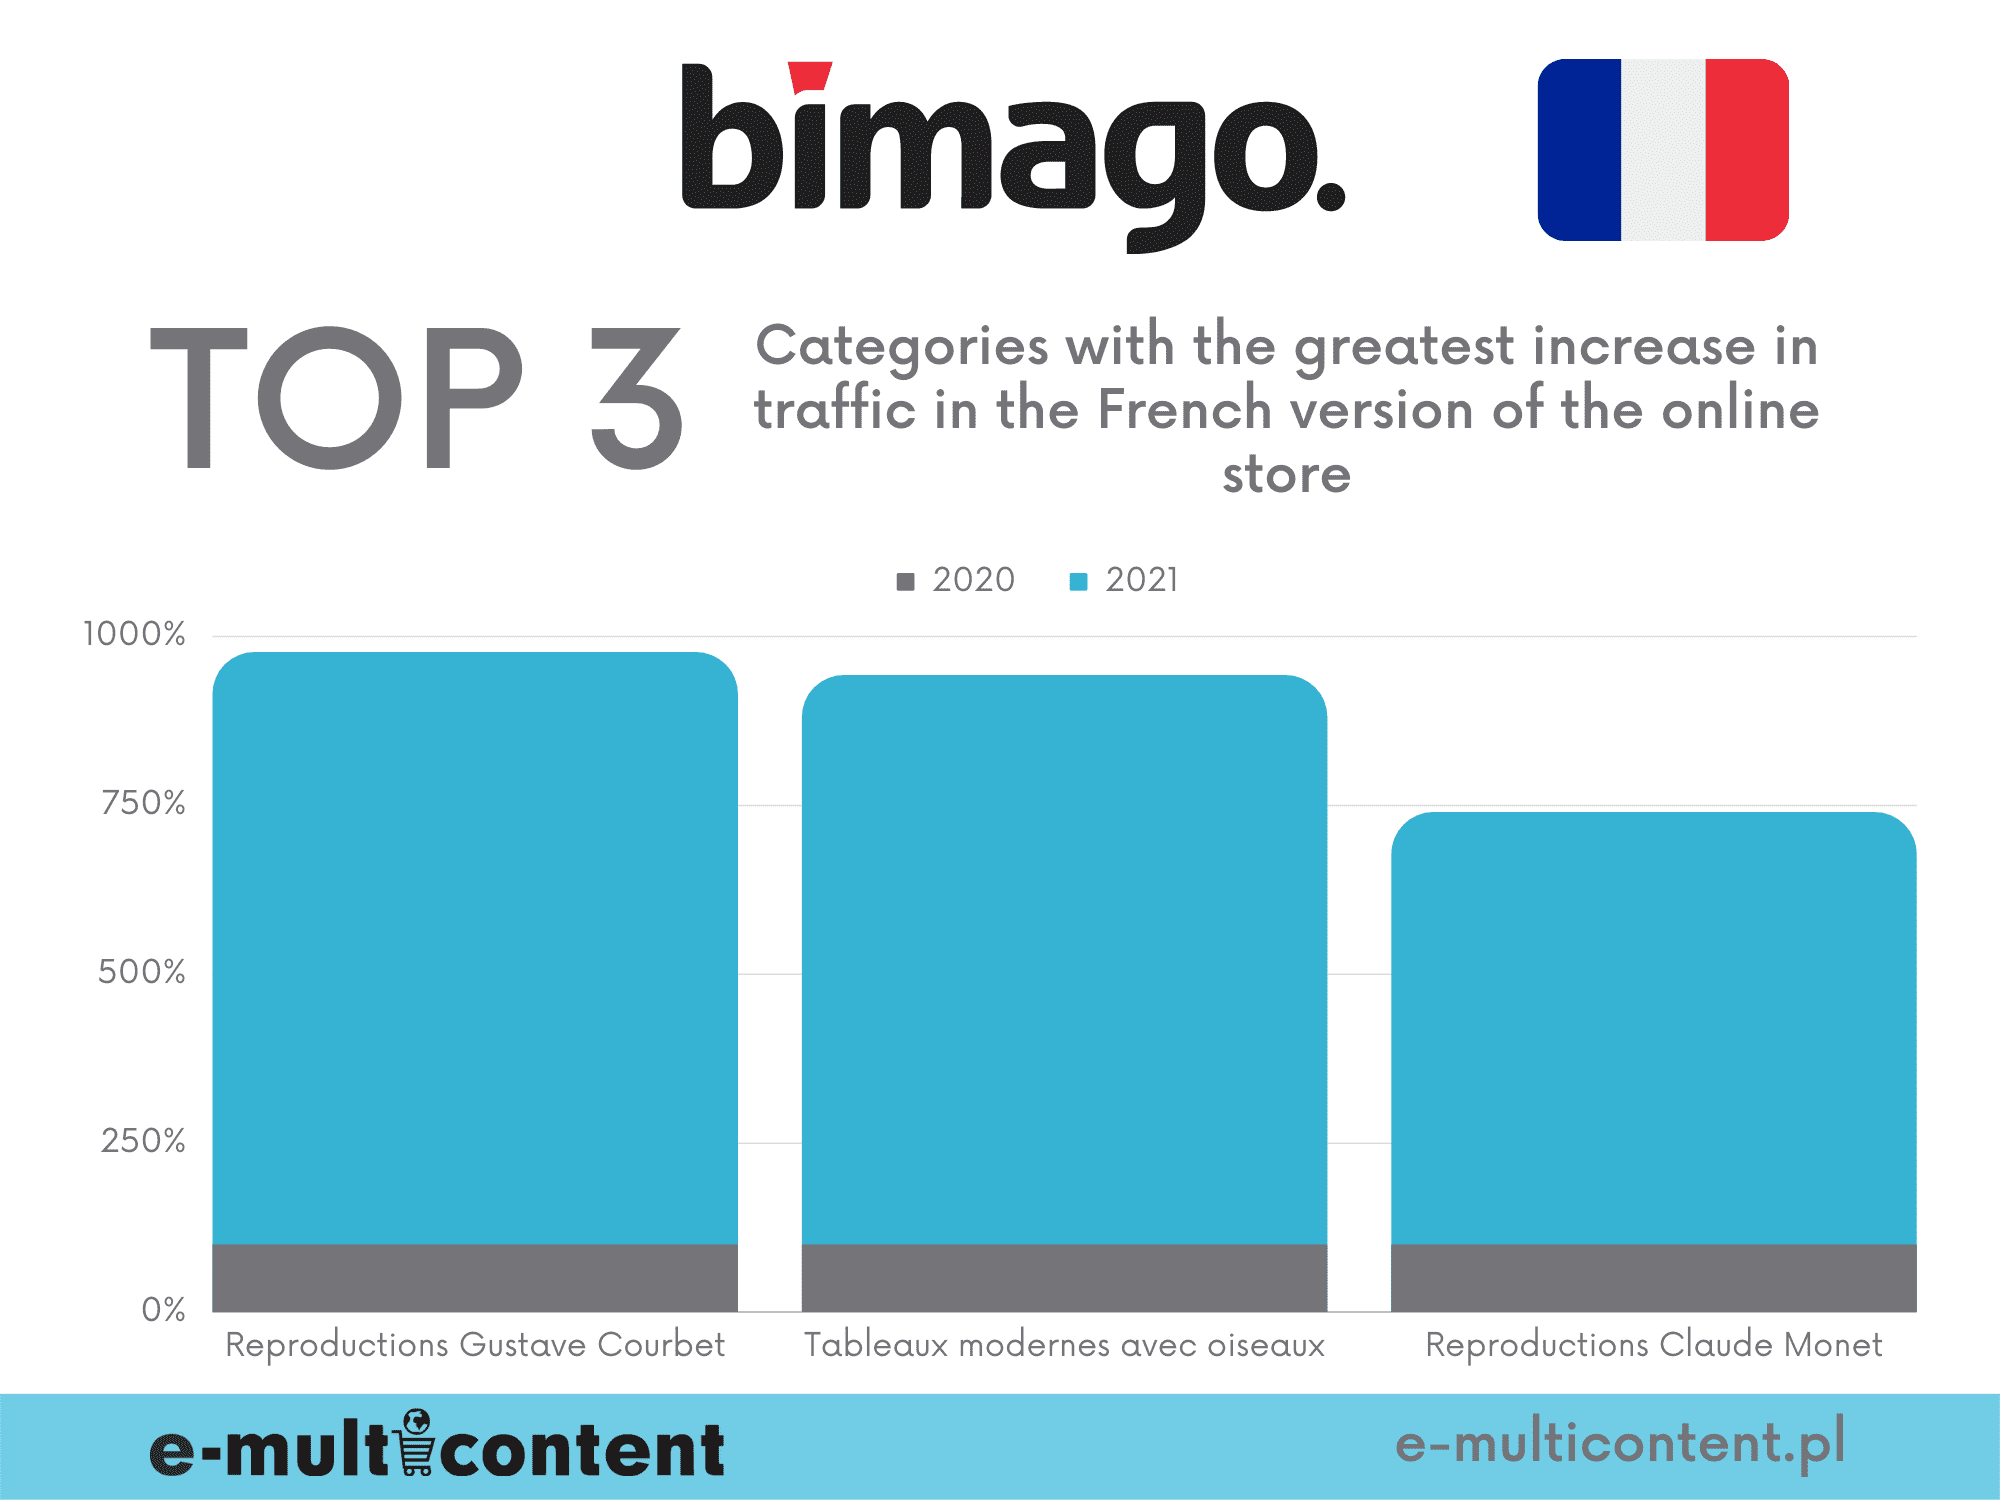 Categories with the highest increase in traffic - bimago.fr